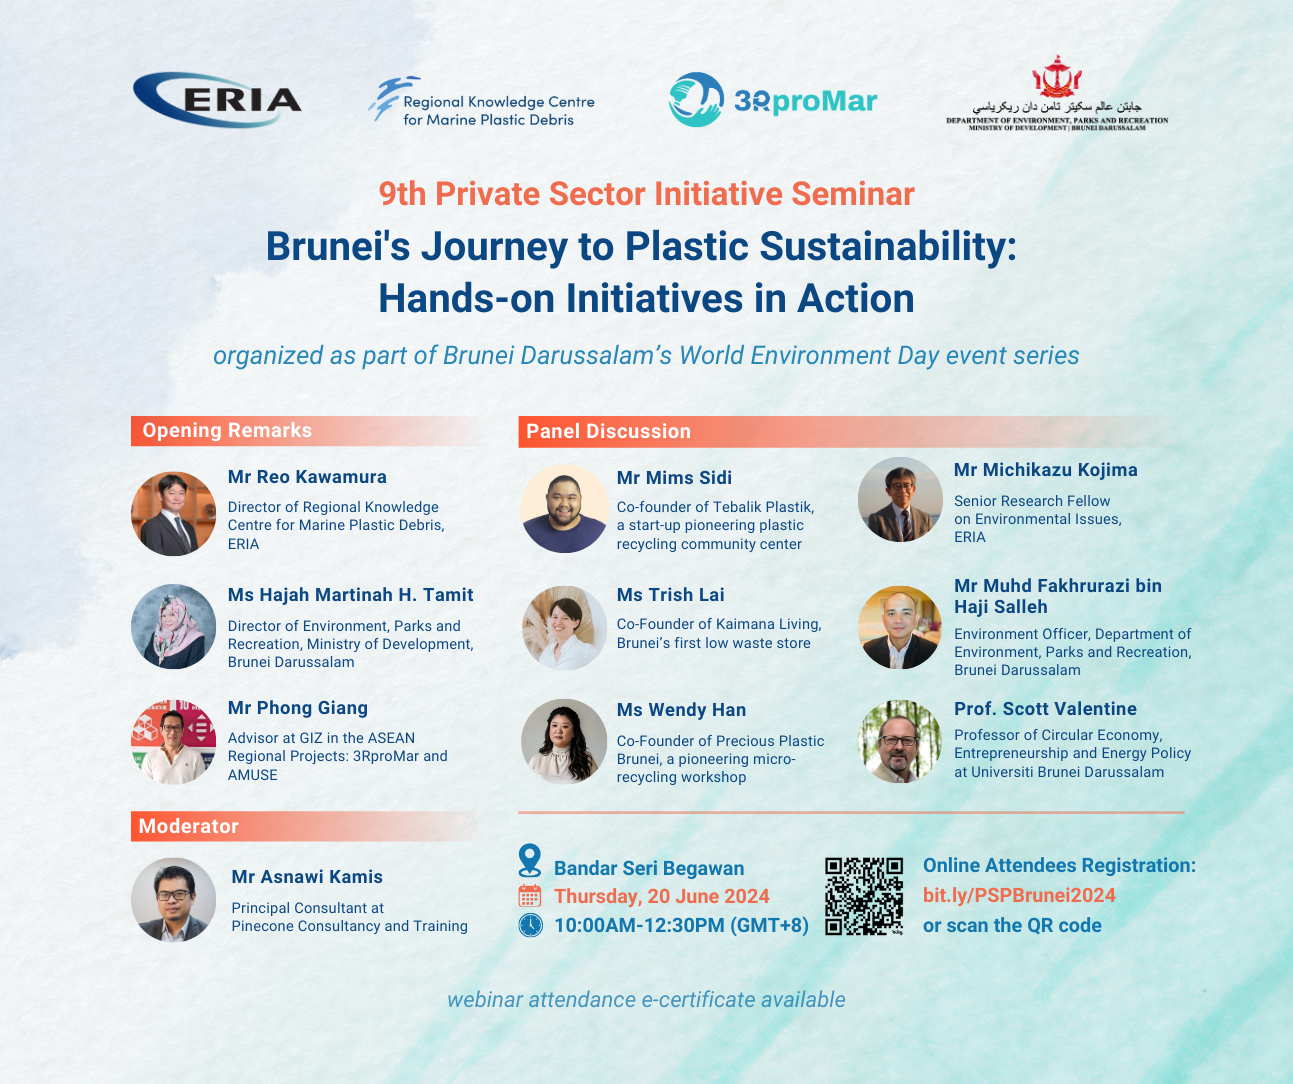 Registration Open for Webinar on Private Sector Initiatives to Reduce Marine Plastics “Brunei's Journey to Plastic Sustainability: Hands-on Initiatives in Action”